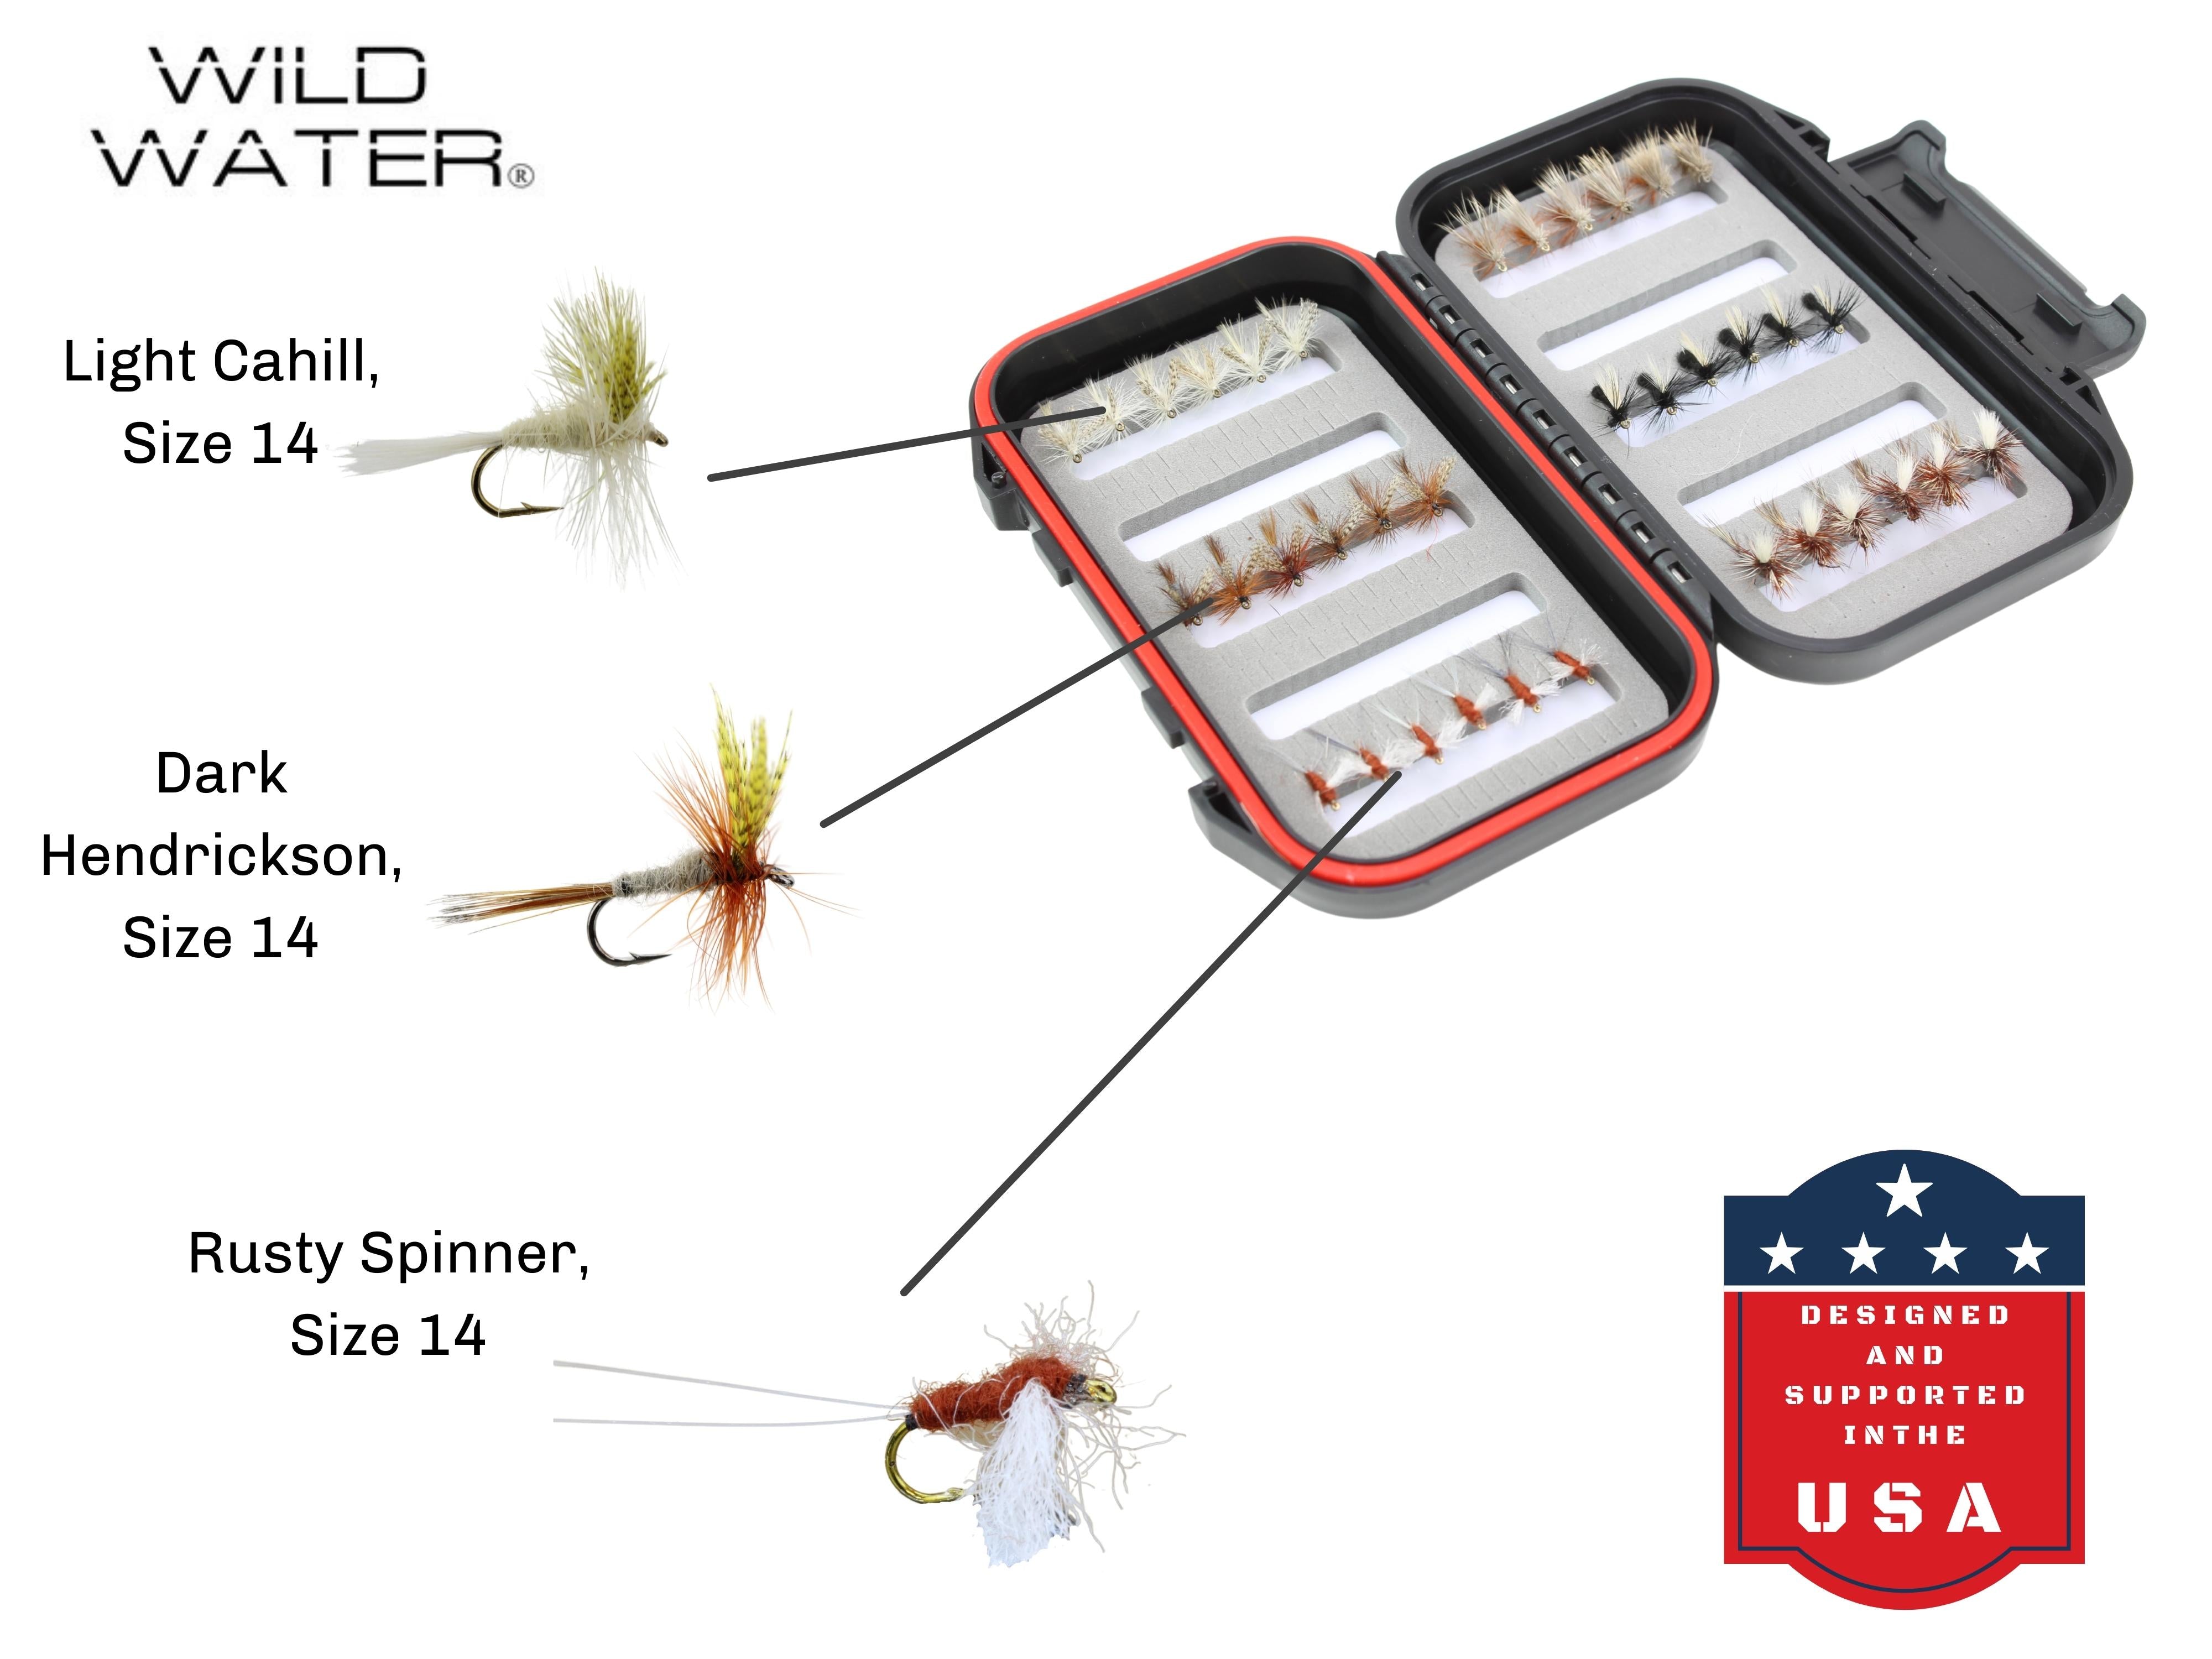 Wild Water Dry Fly Assortment, 36 Flies with Small Fly Box